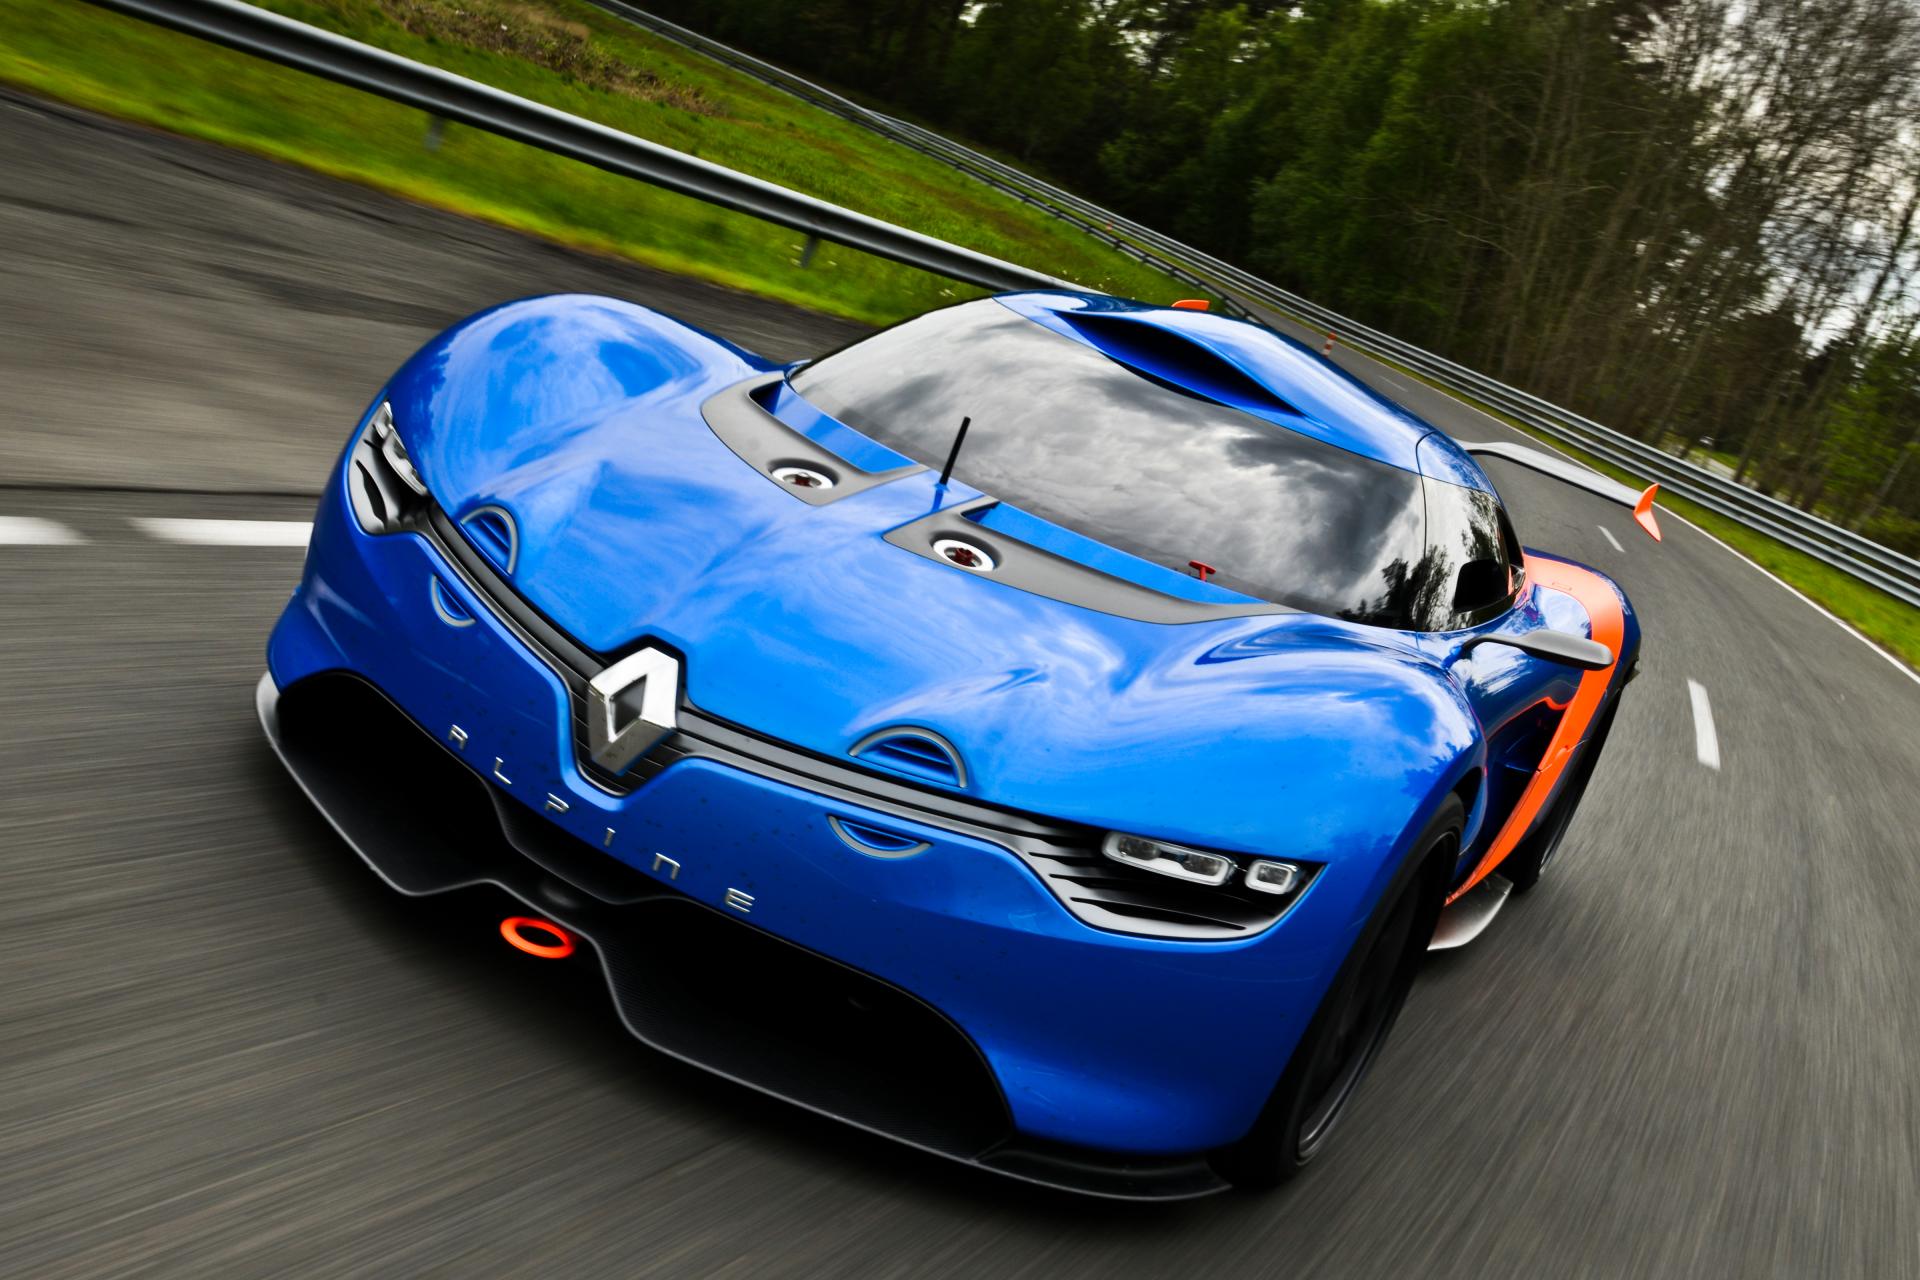 Alpine A110-50 Concept Wallpapers